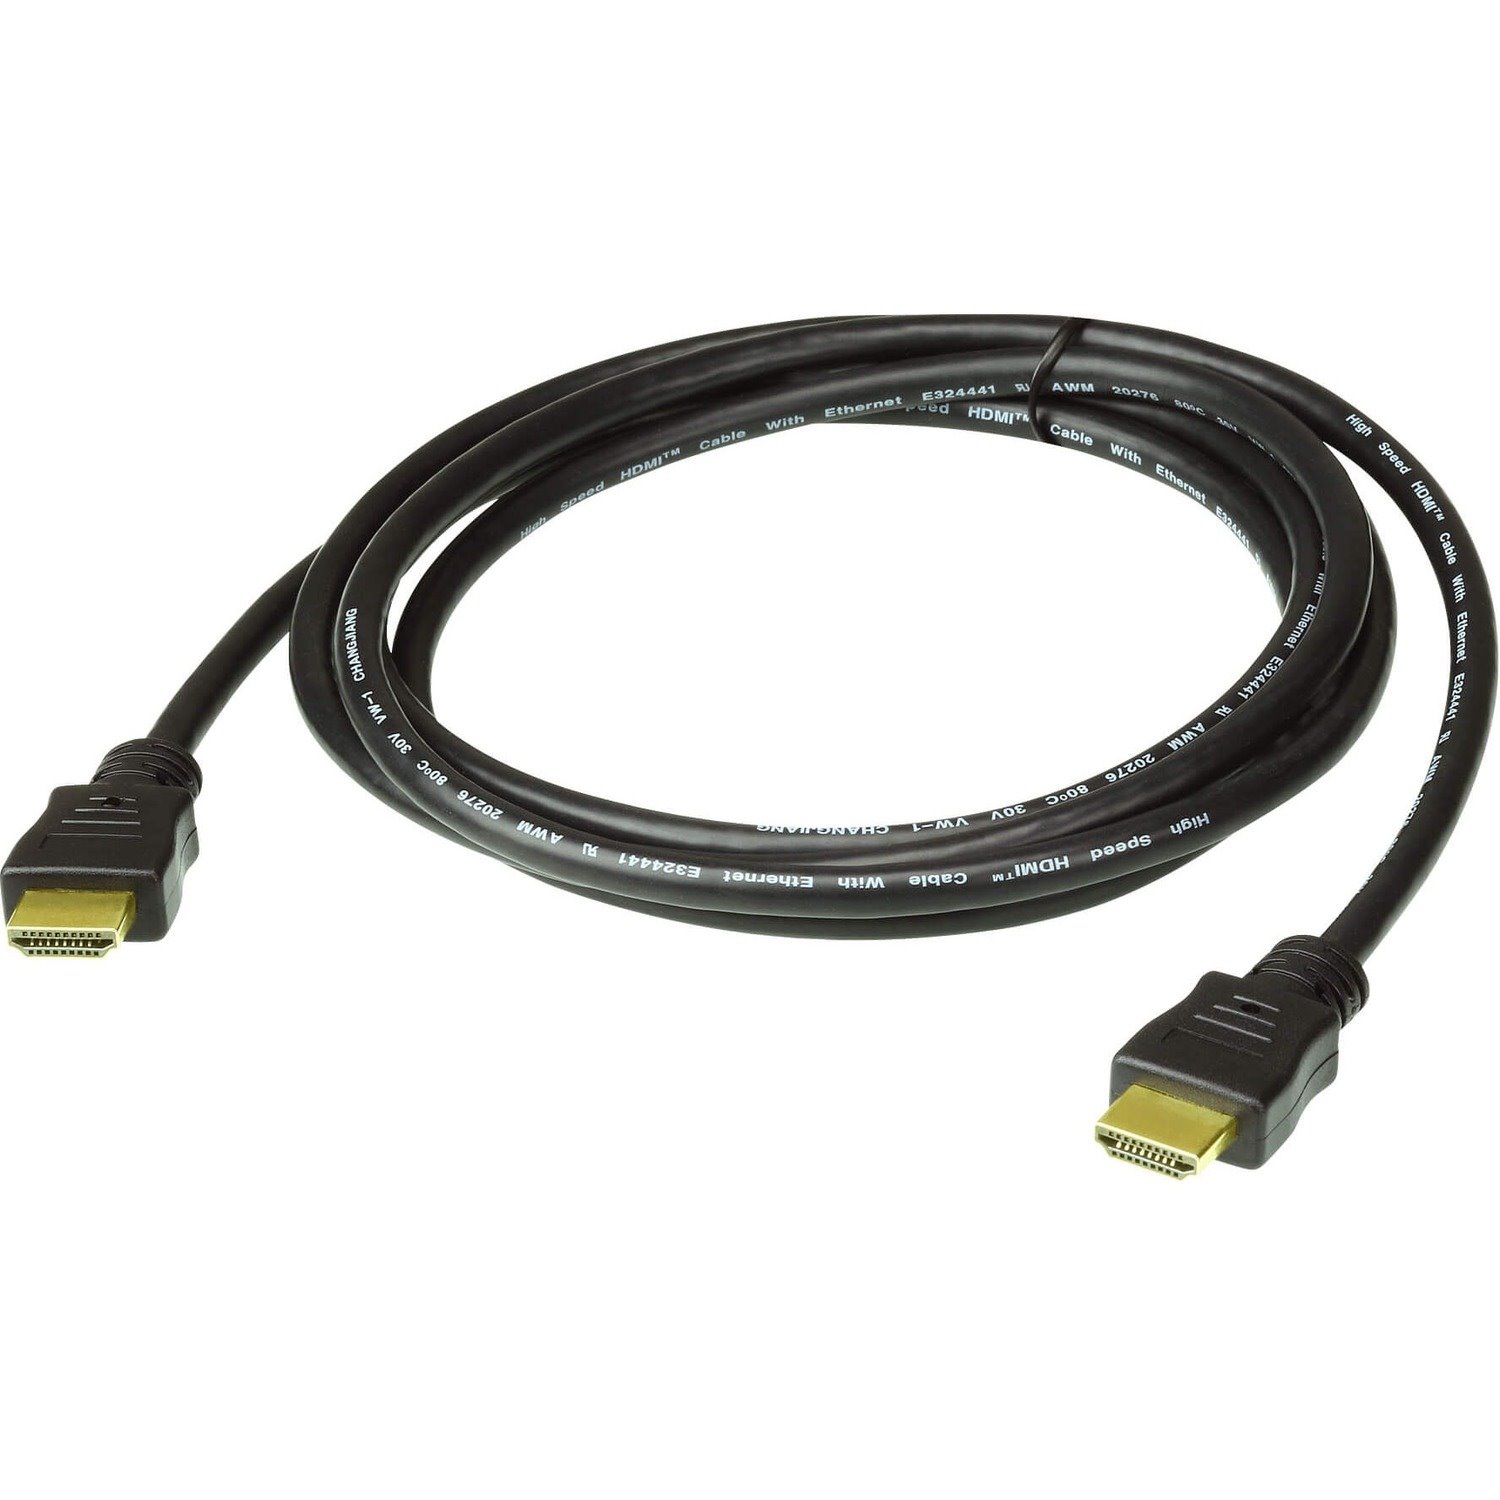 ATEN 2L-7D02H-1 6 Feet High Speed True 4K HDMI Cable with Ethernet